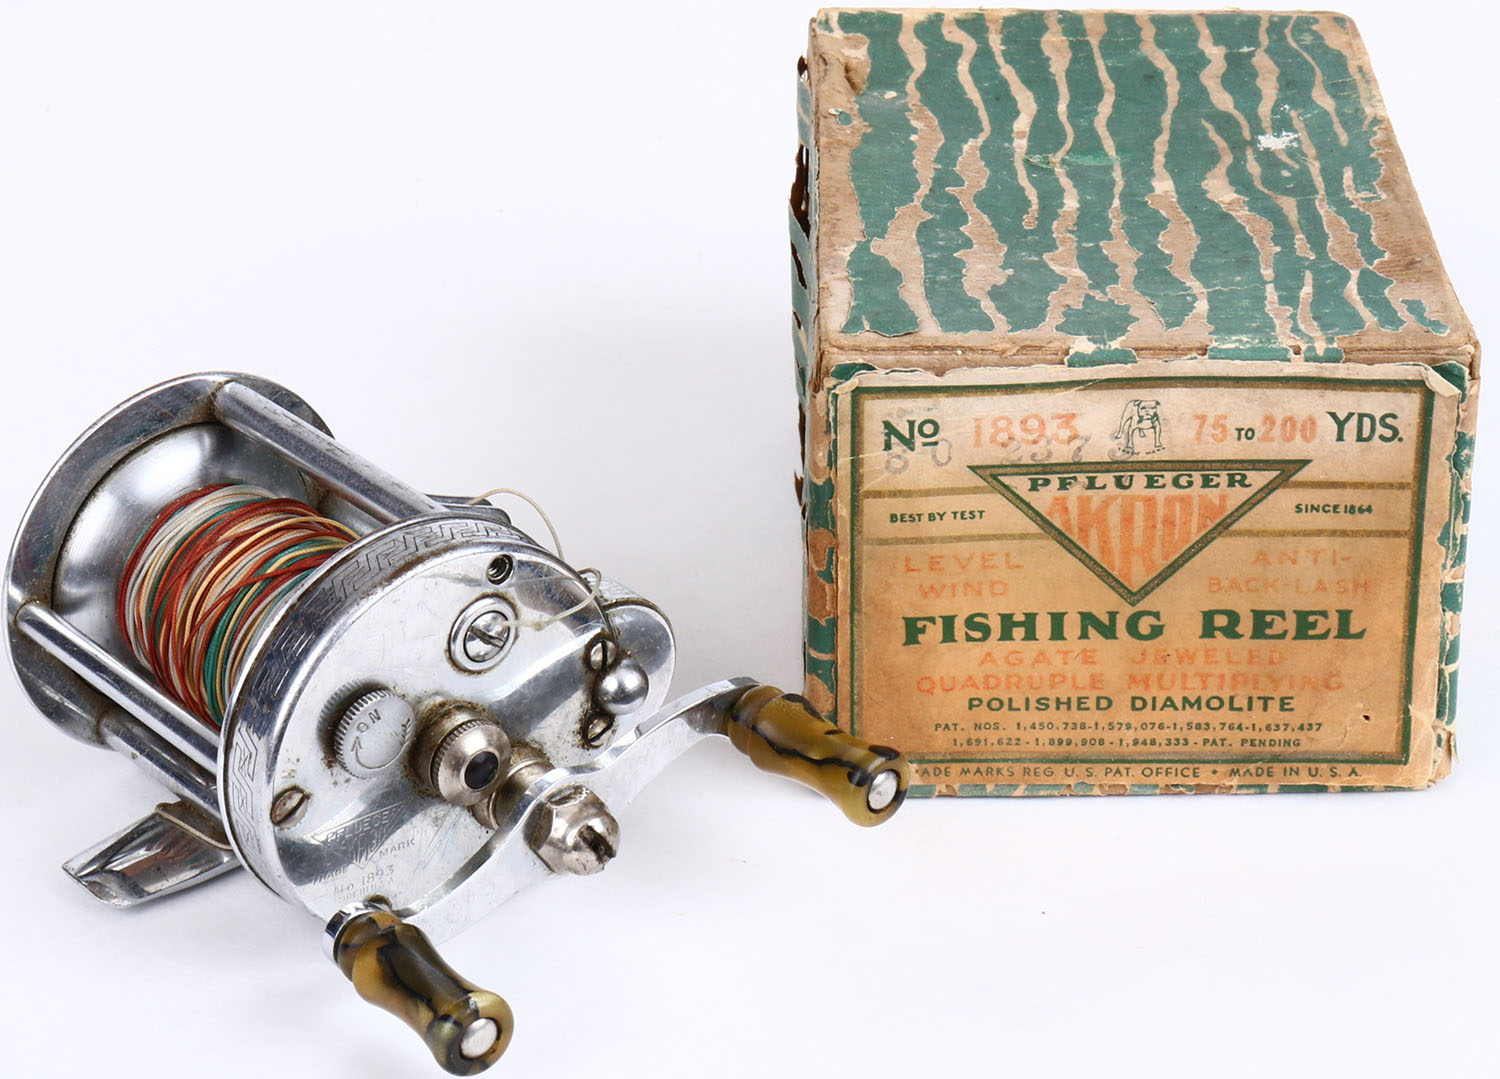 Item # 7651 (Ended 2024-03-01 22:05:02) - Pflueger Akron 1893 level wind  reel in original box, strong cli